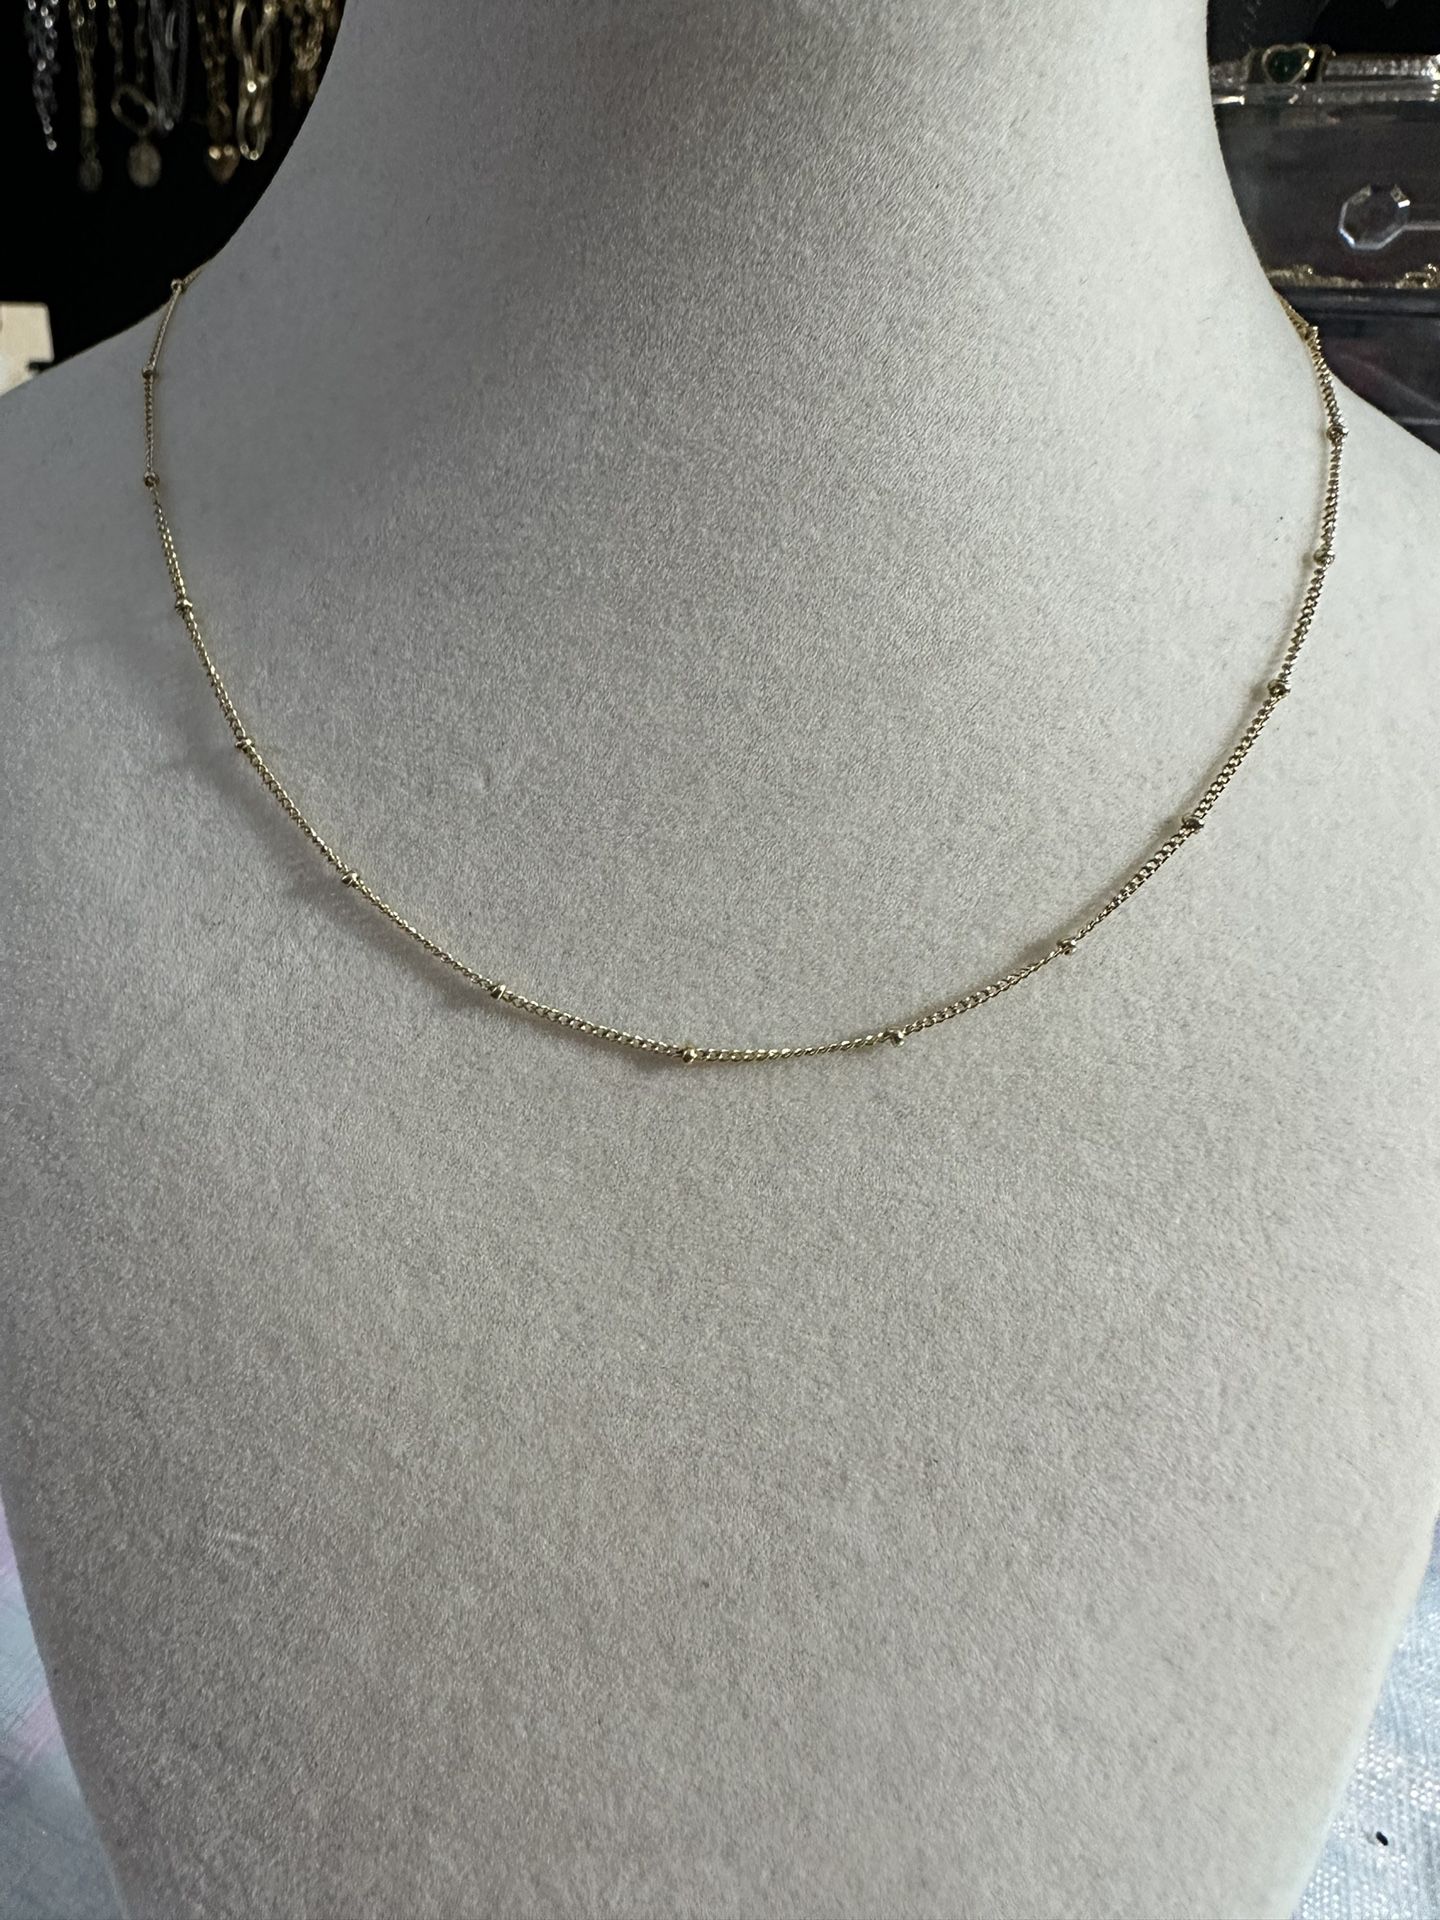 New Stainless Steel Beaded Choker Necklace